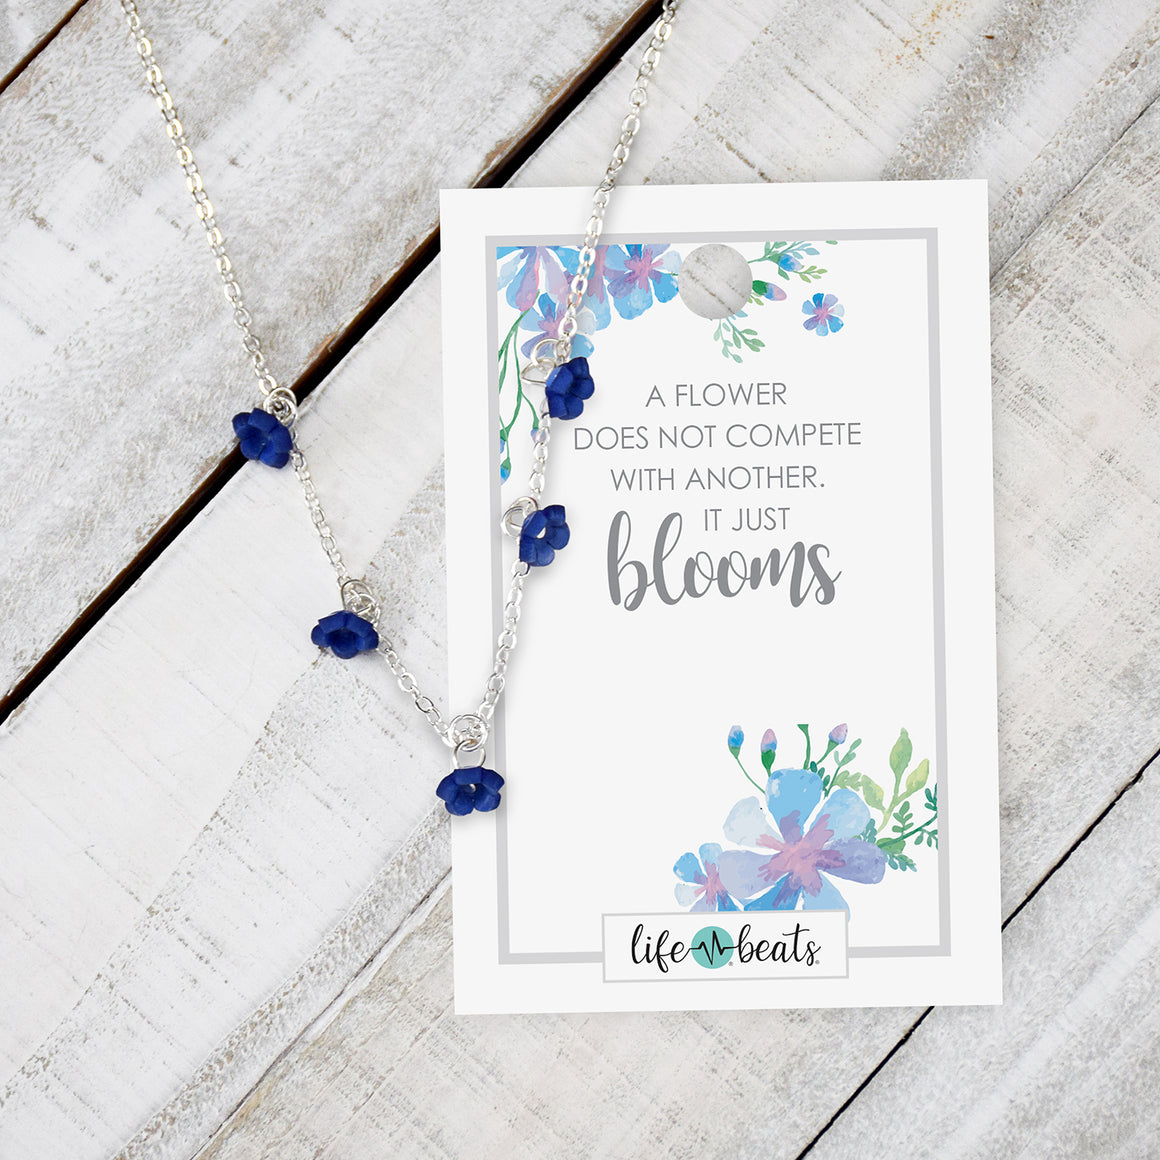 Dainty Flower Charm Necklace - Blue flowers on a silver finish chain